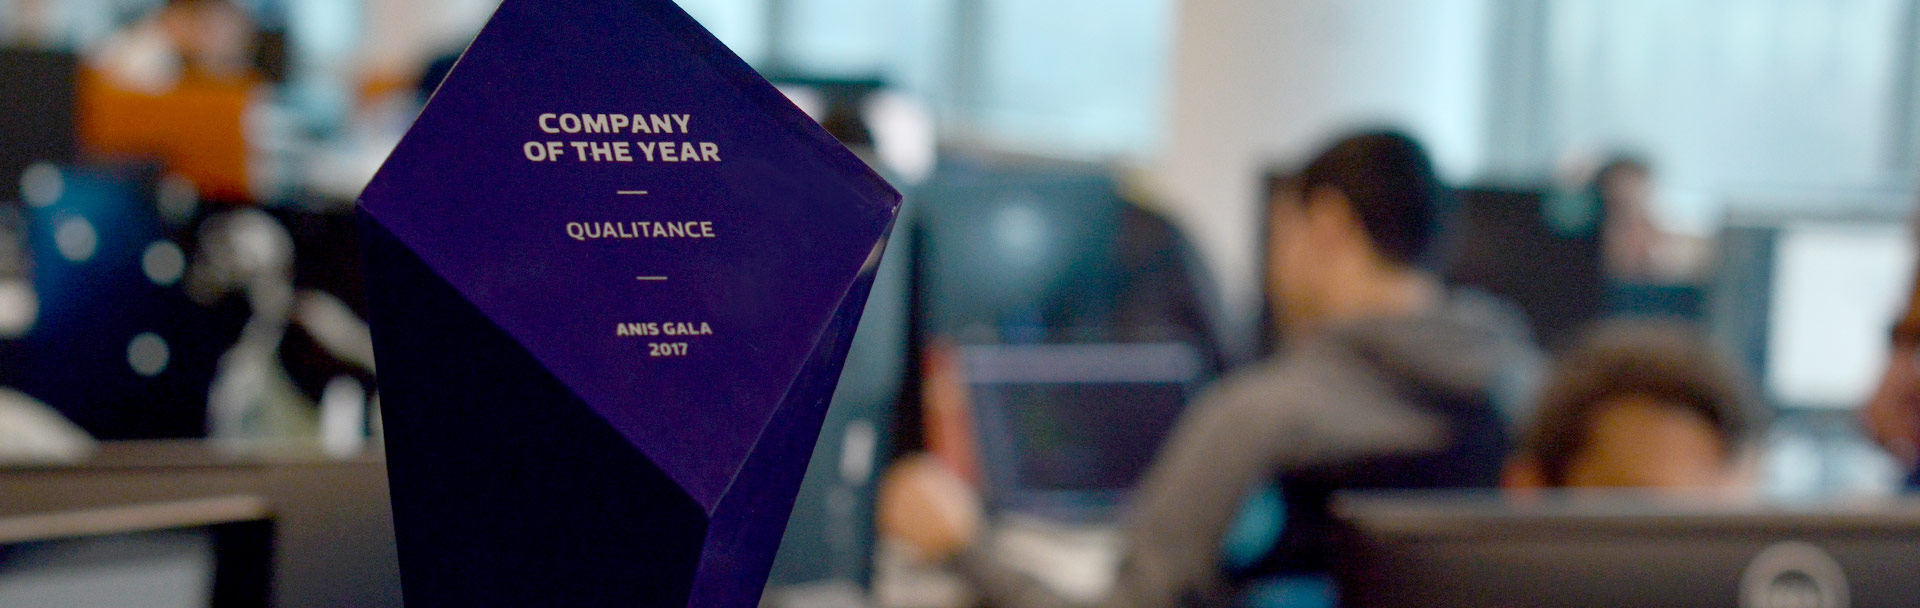 How 200 people won the Company of the Year award